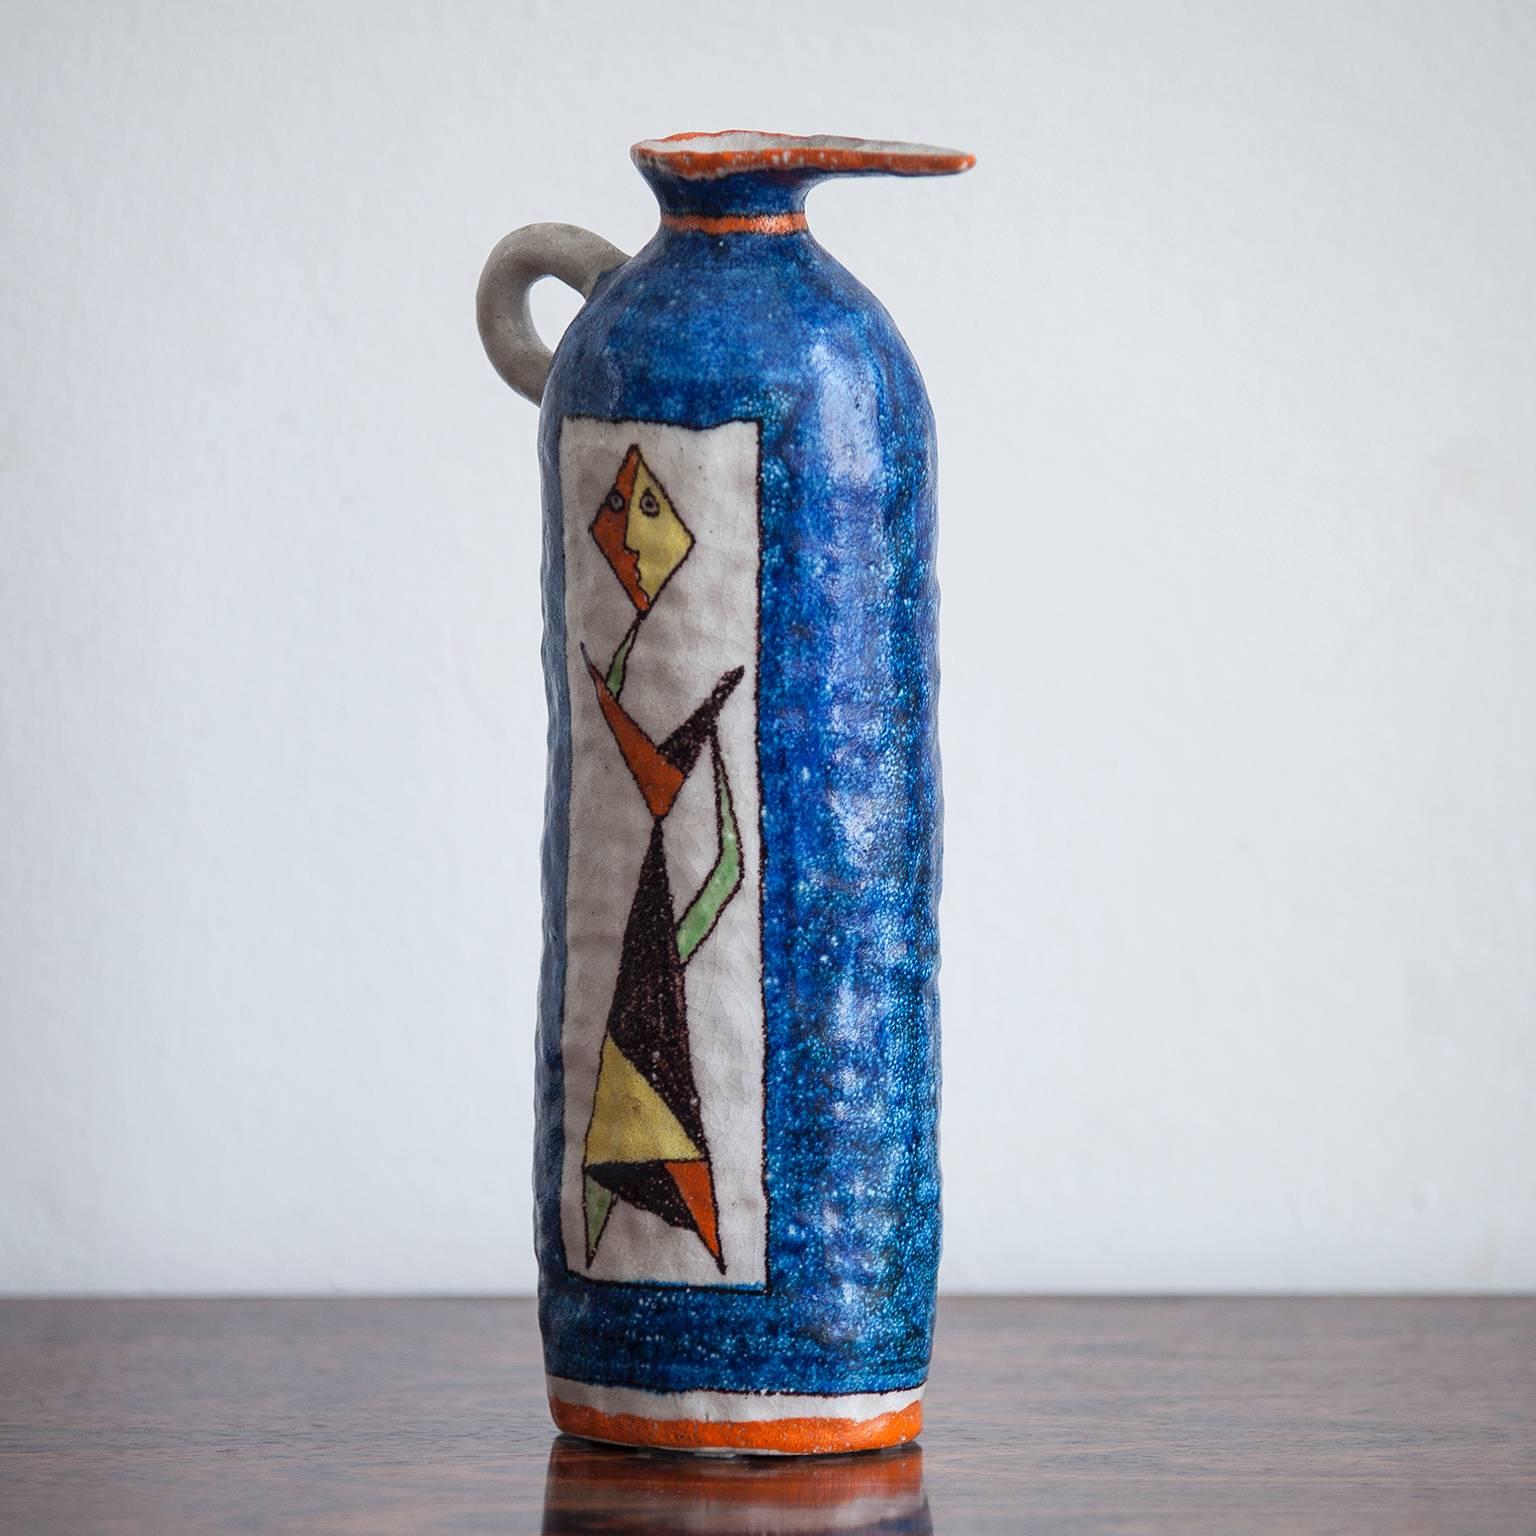 Very impressive blue pitcher by Andrea D'Arienzo, Italy, 1950. Geometric underglaze painting in yellow, orange-red, black on white textured background. Andrea D'Arienzo worked with Guido Gambone in his studio in the 1960 decade.
           